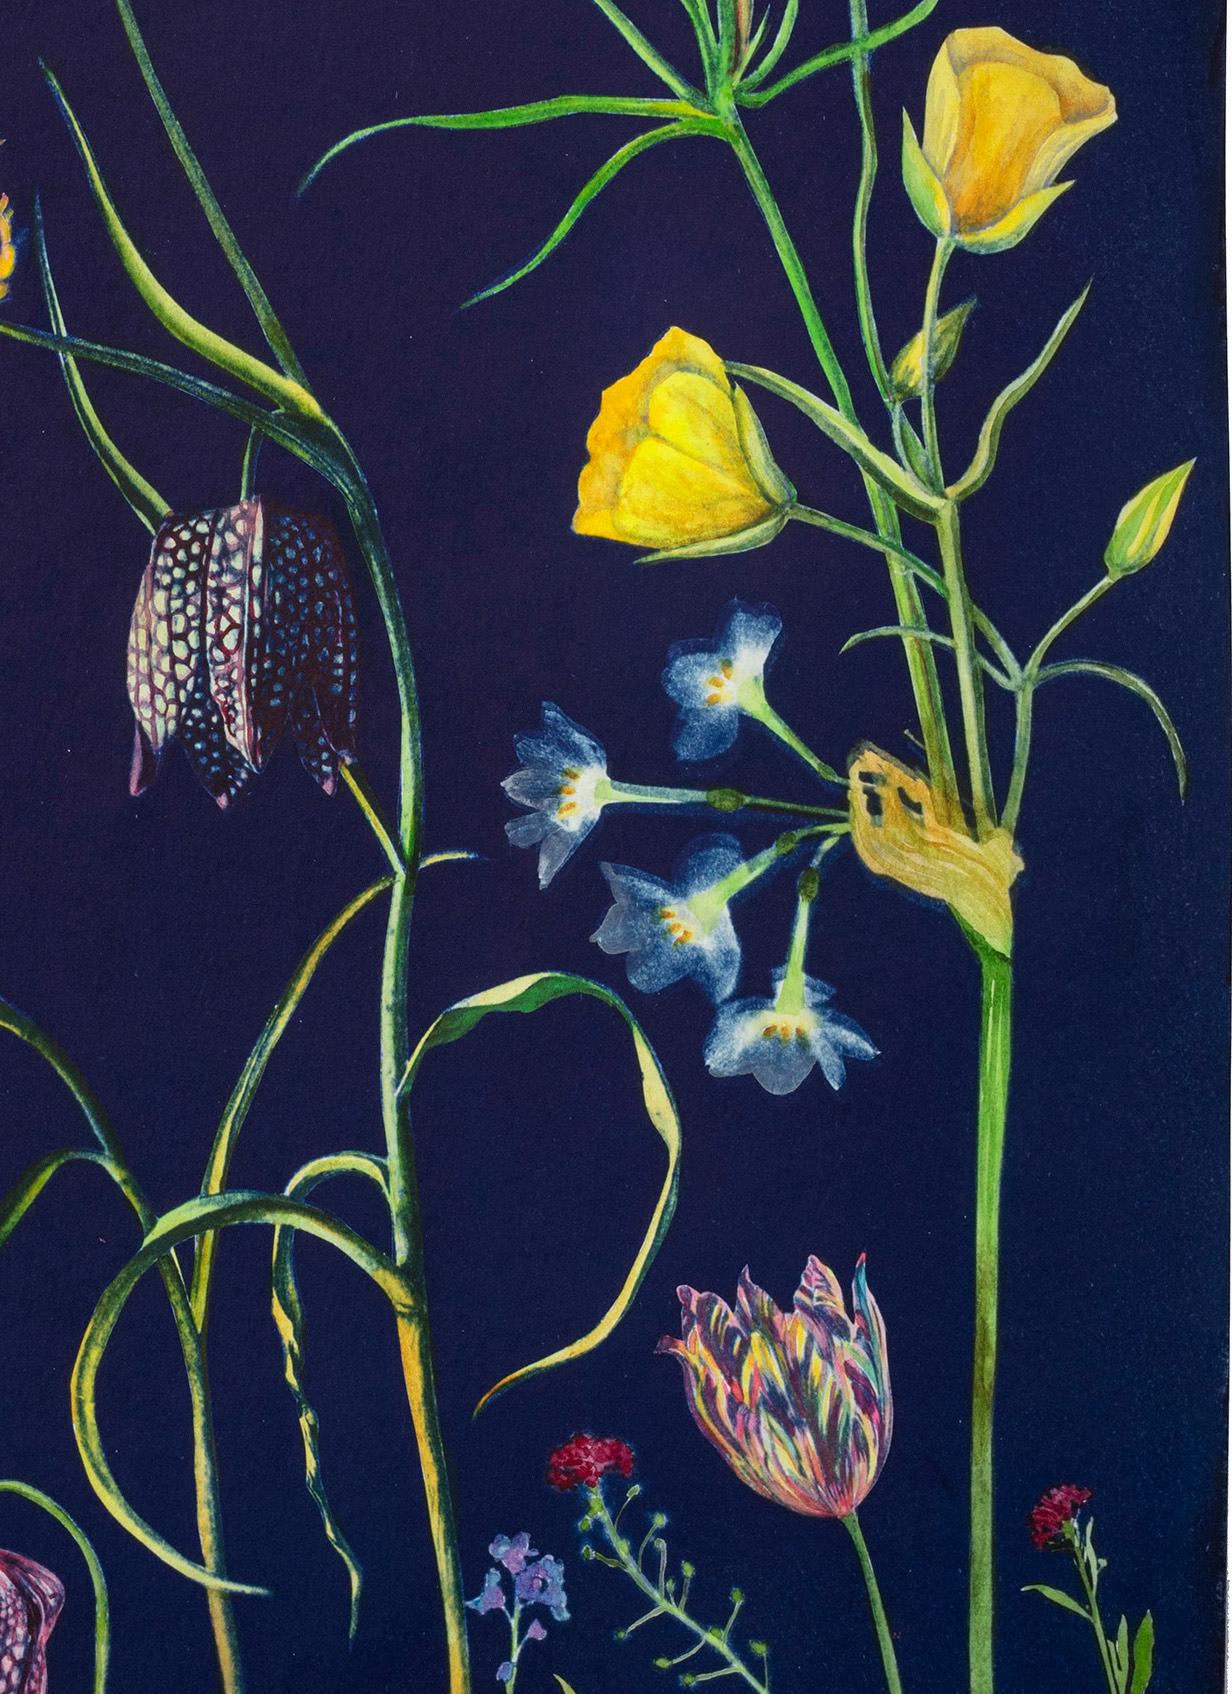 In this vertical work in watercolor, gouache, and cyanotype on Cold Press watercolor paper, meticulously detailed flowers, including fritillarias, cosmos, and buttercups, are colorful and luminous in shades of bright yellow, orange, magenta, pale